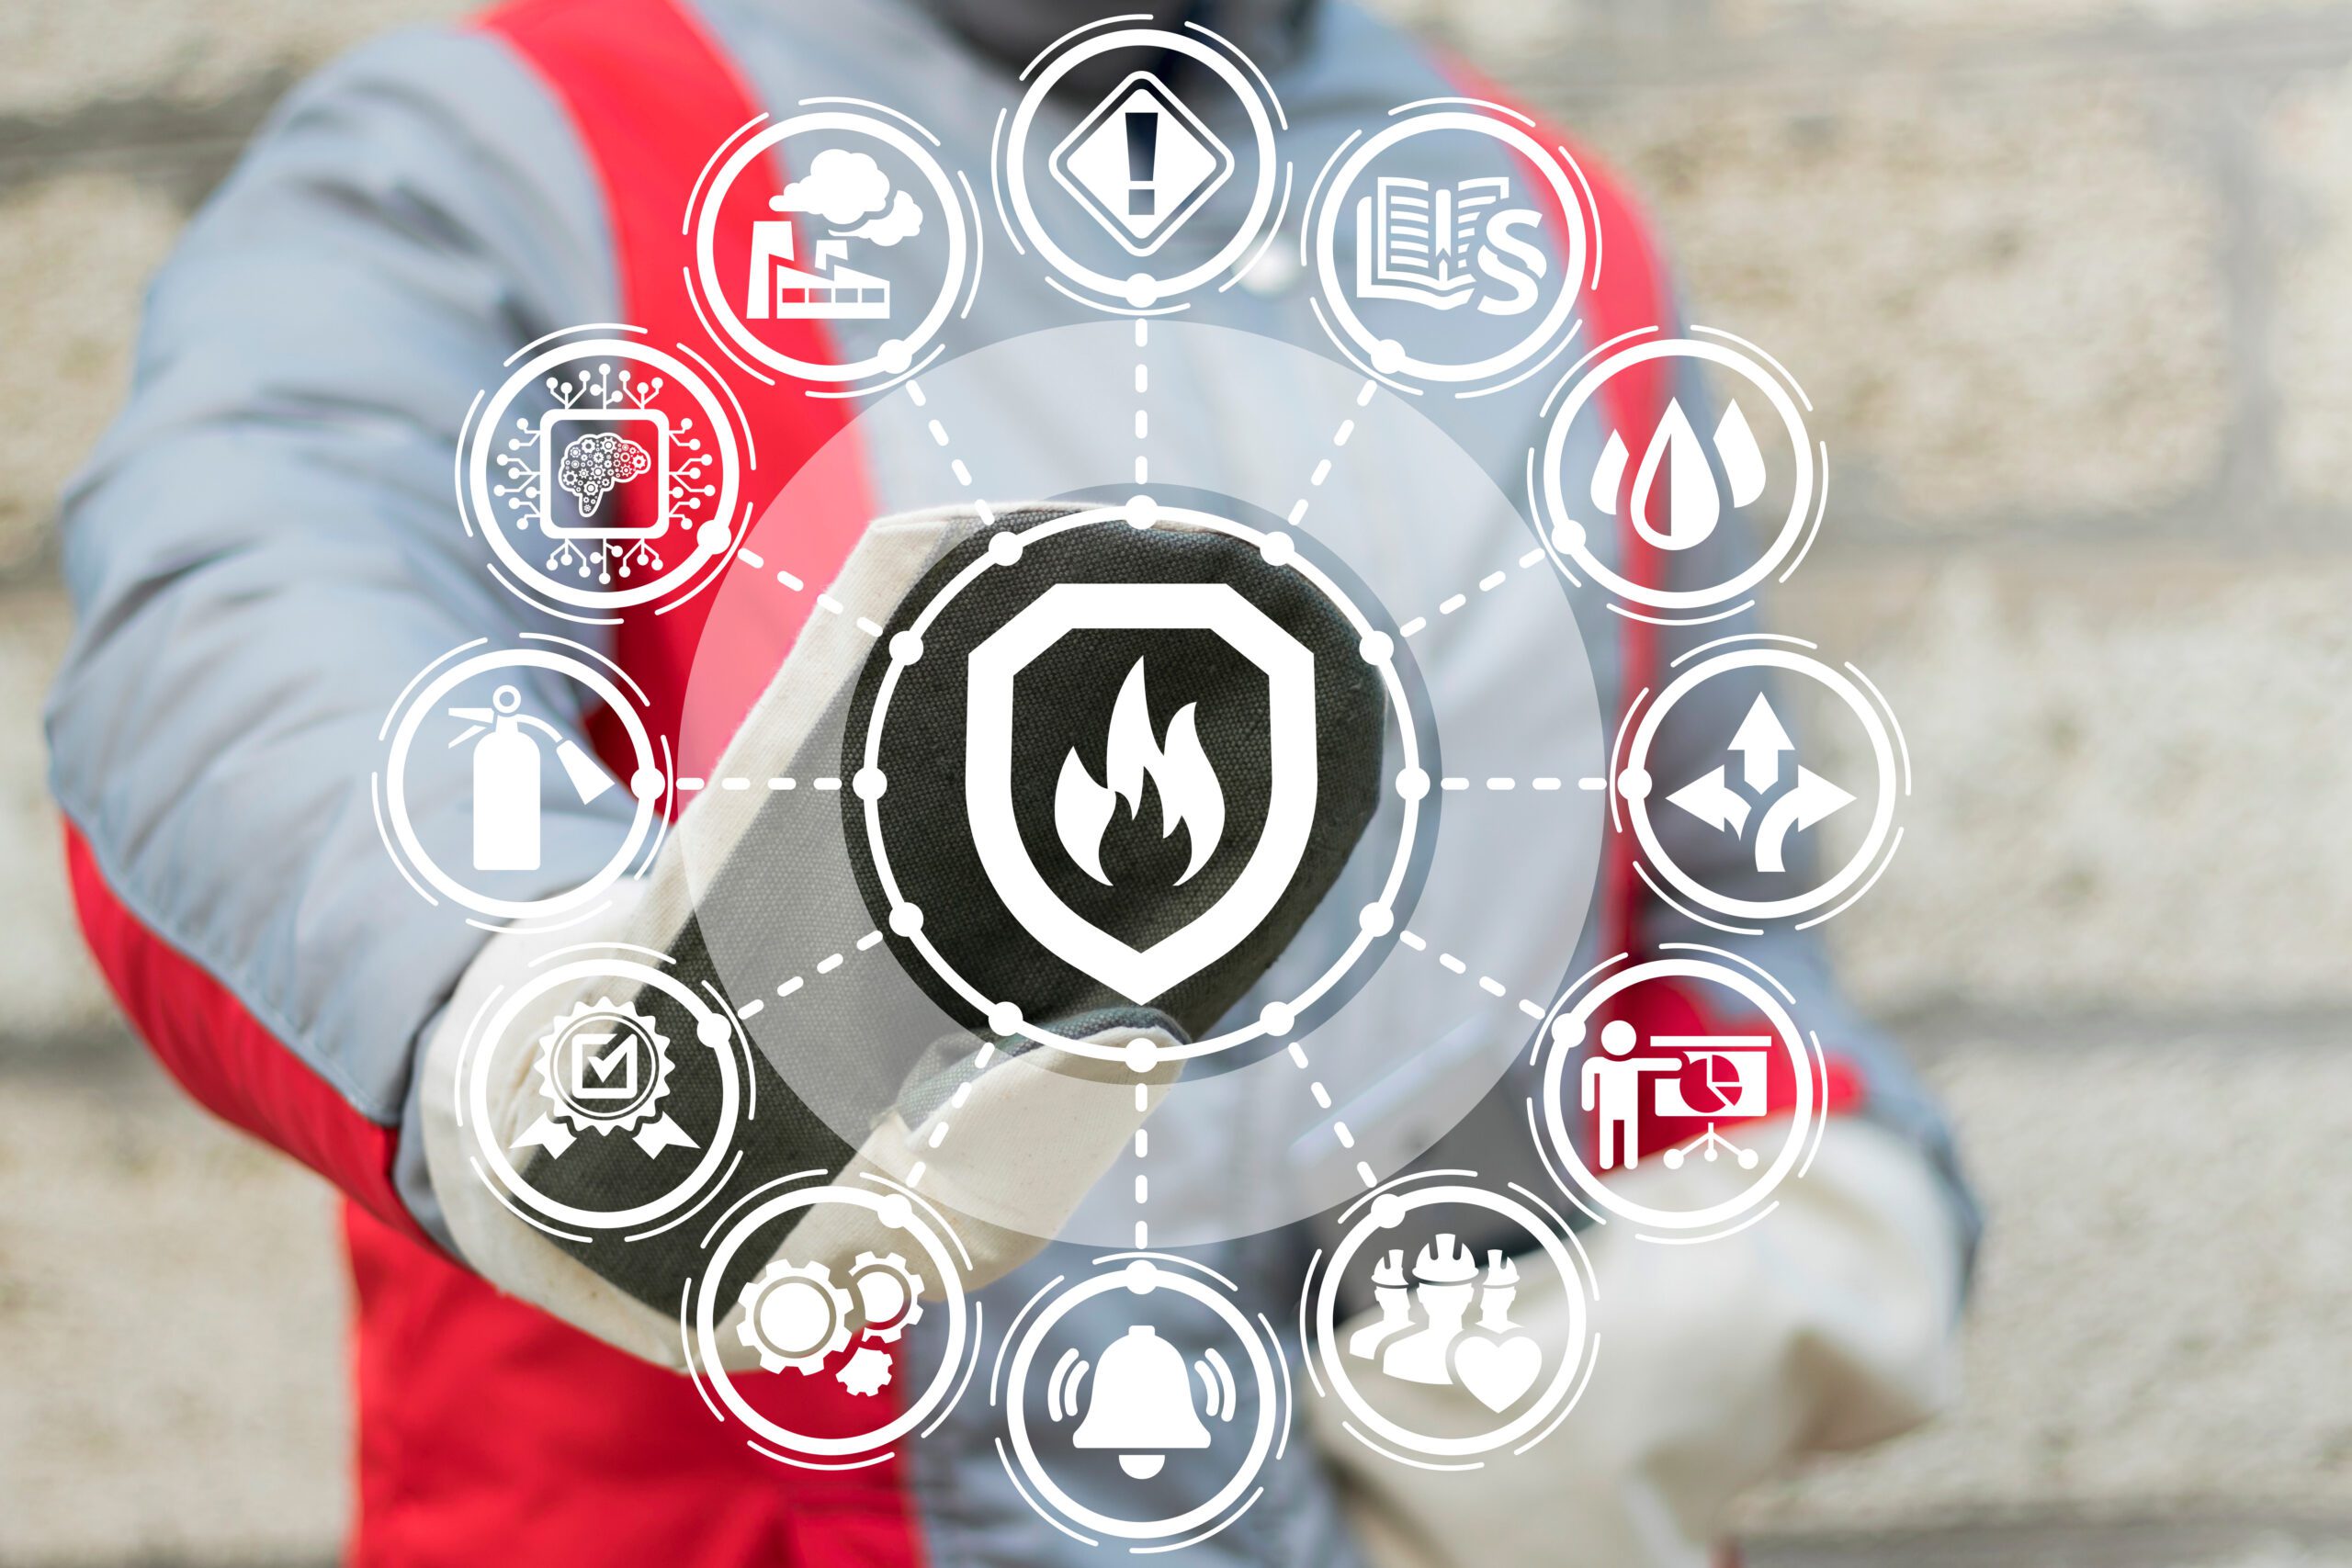 Smart / IoT Fire Protection Systems